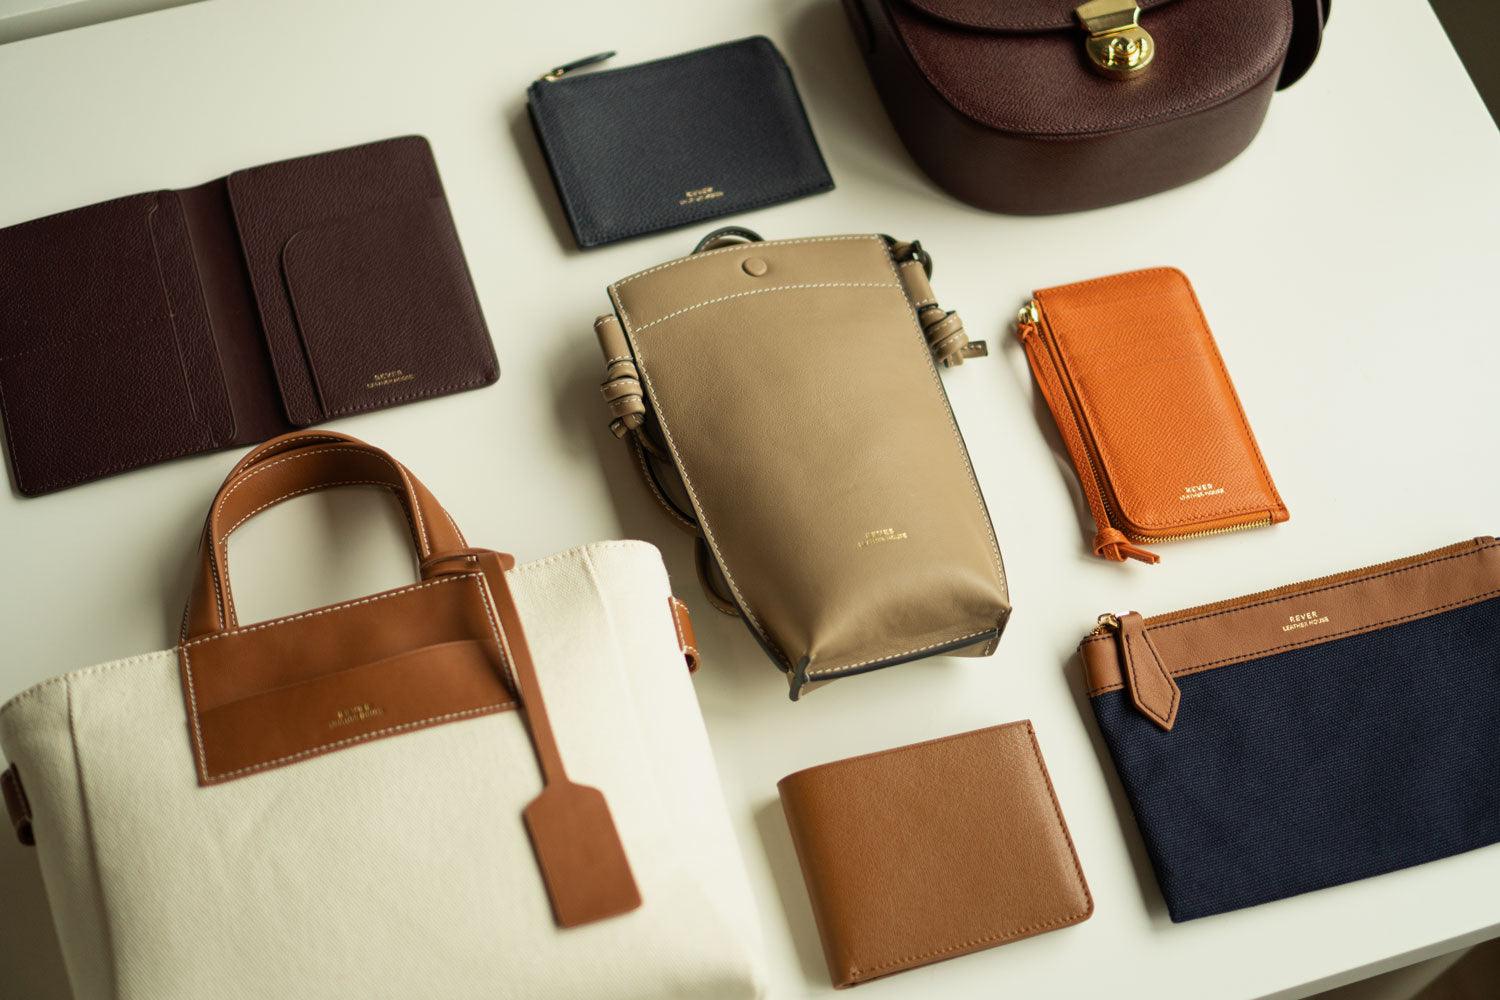 What You Need To Know About Styling Leather Accessories